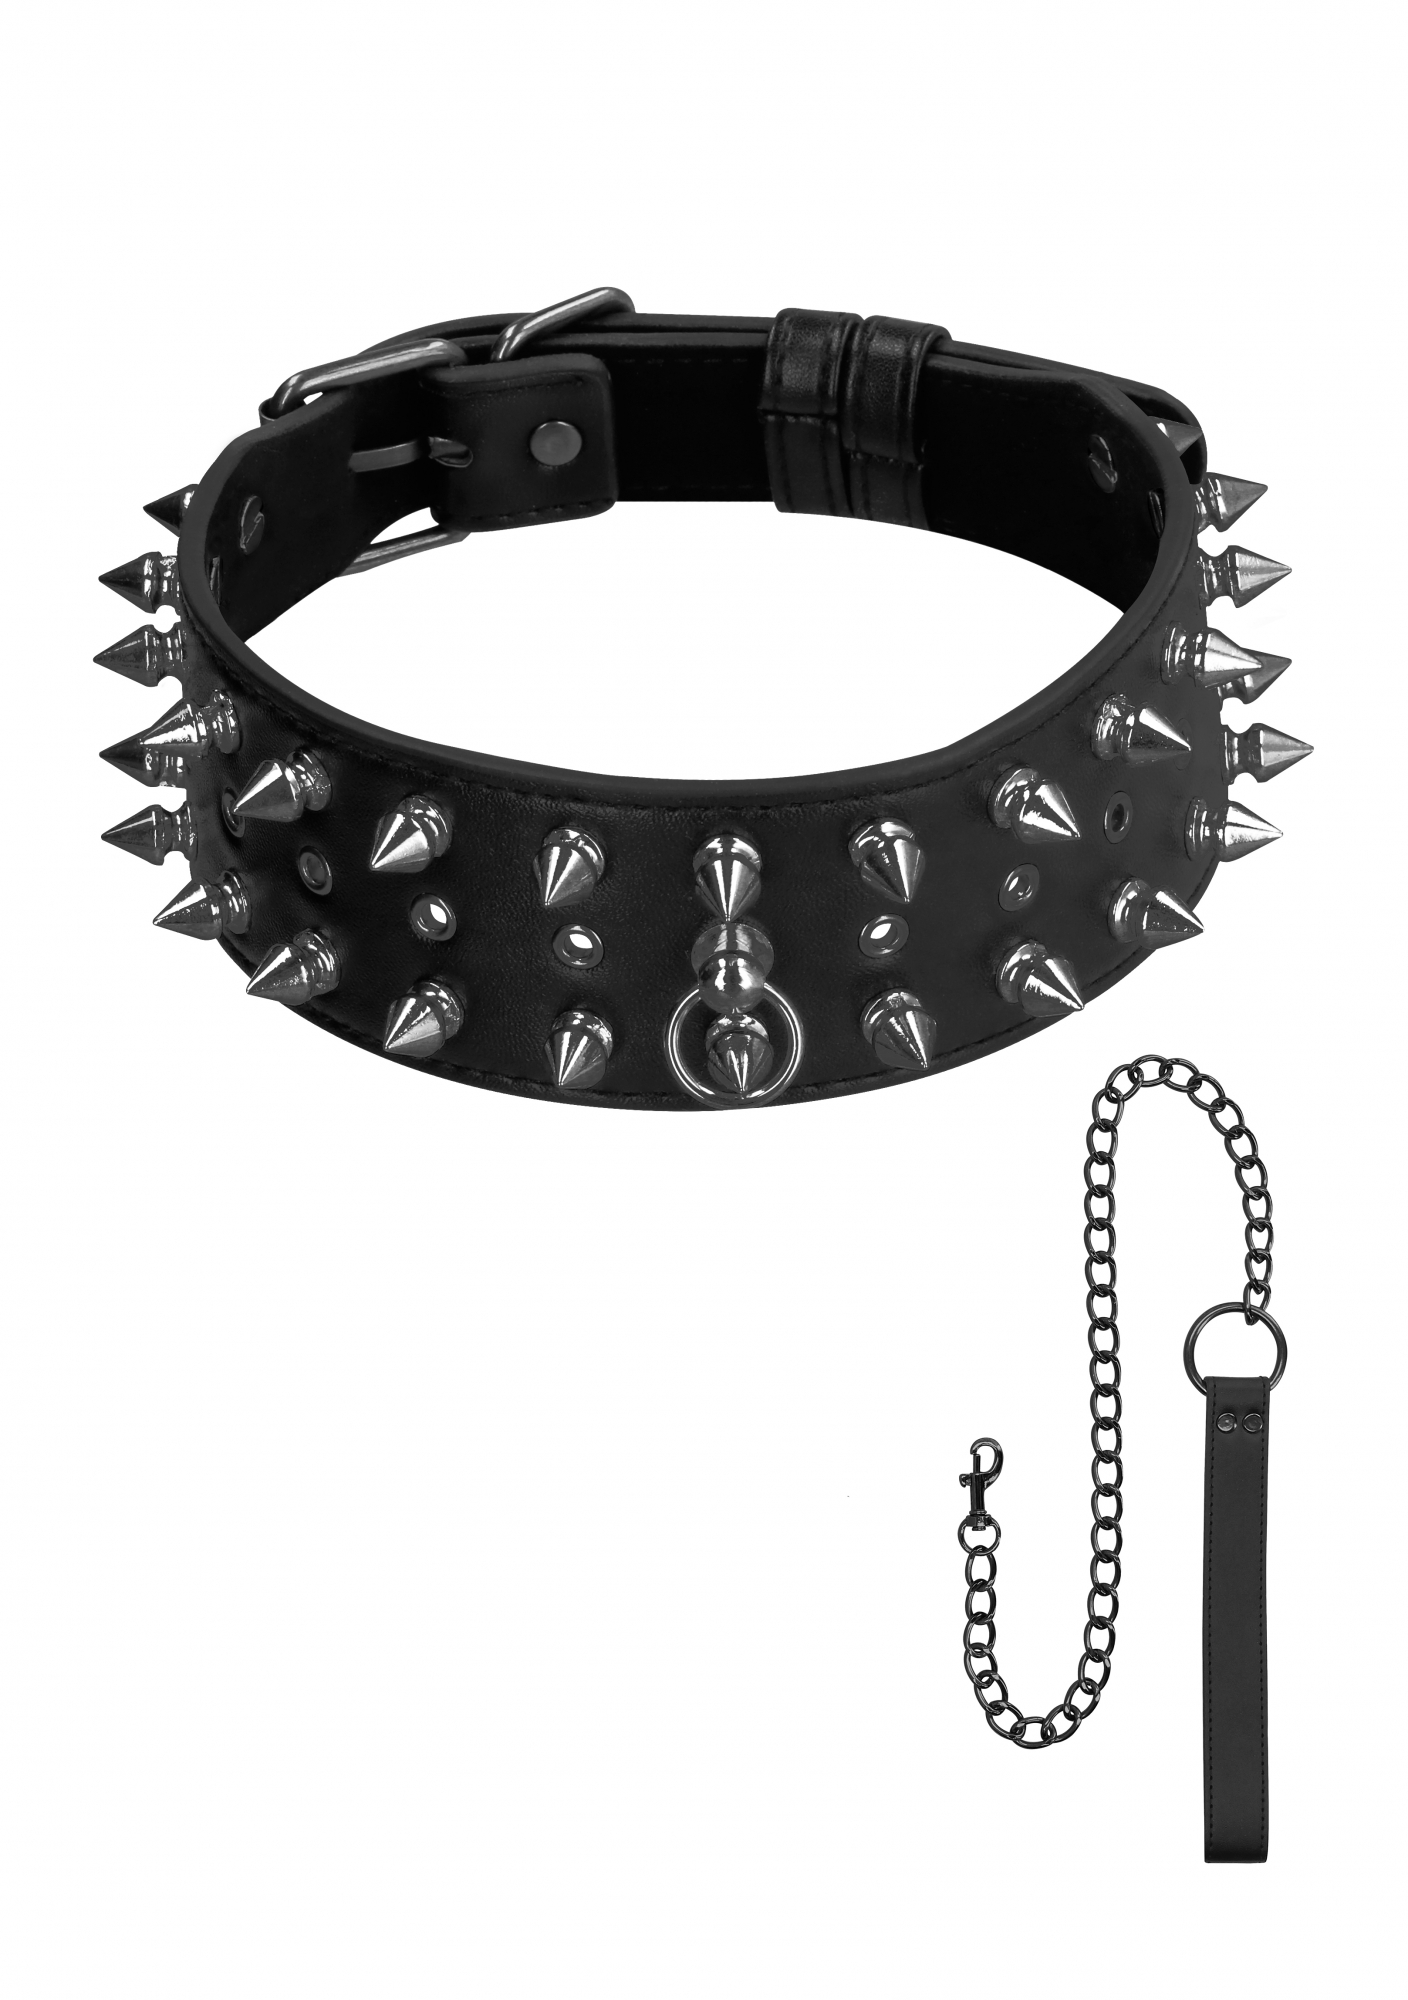 Ouch! Skulls and Bones - Neck Chain with Spikes and Leash